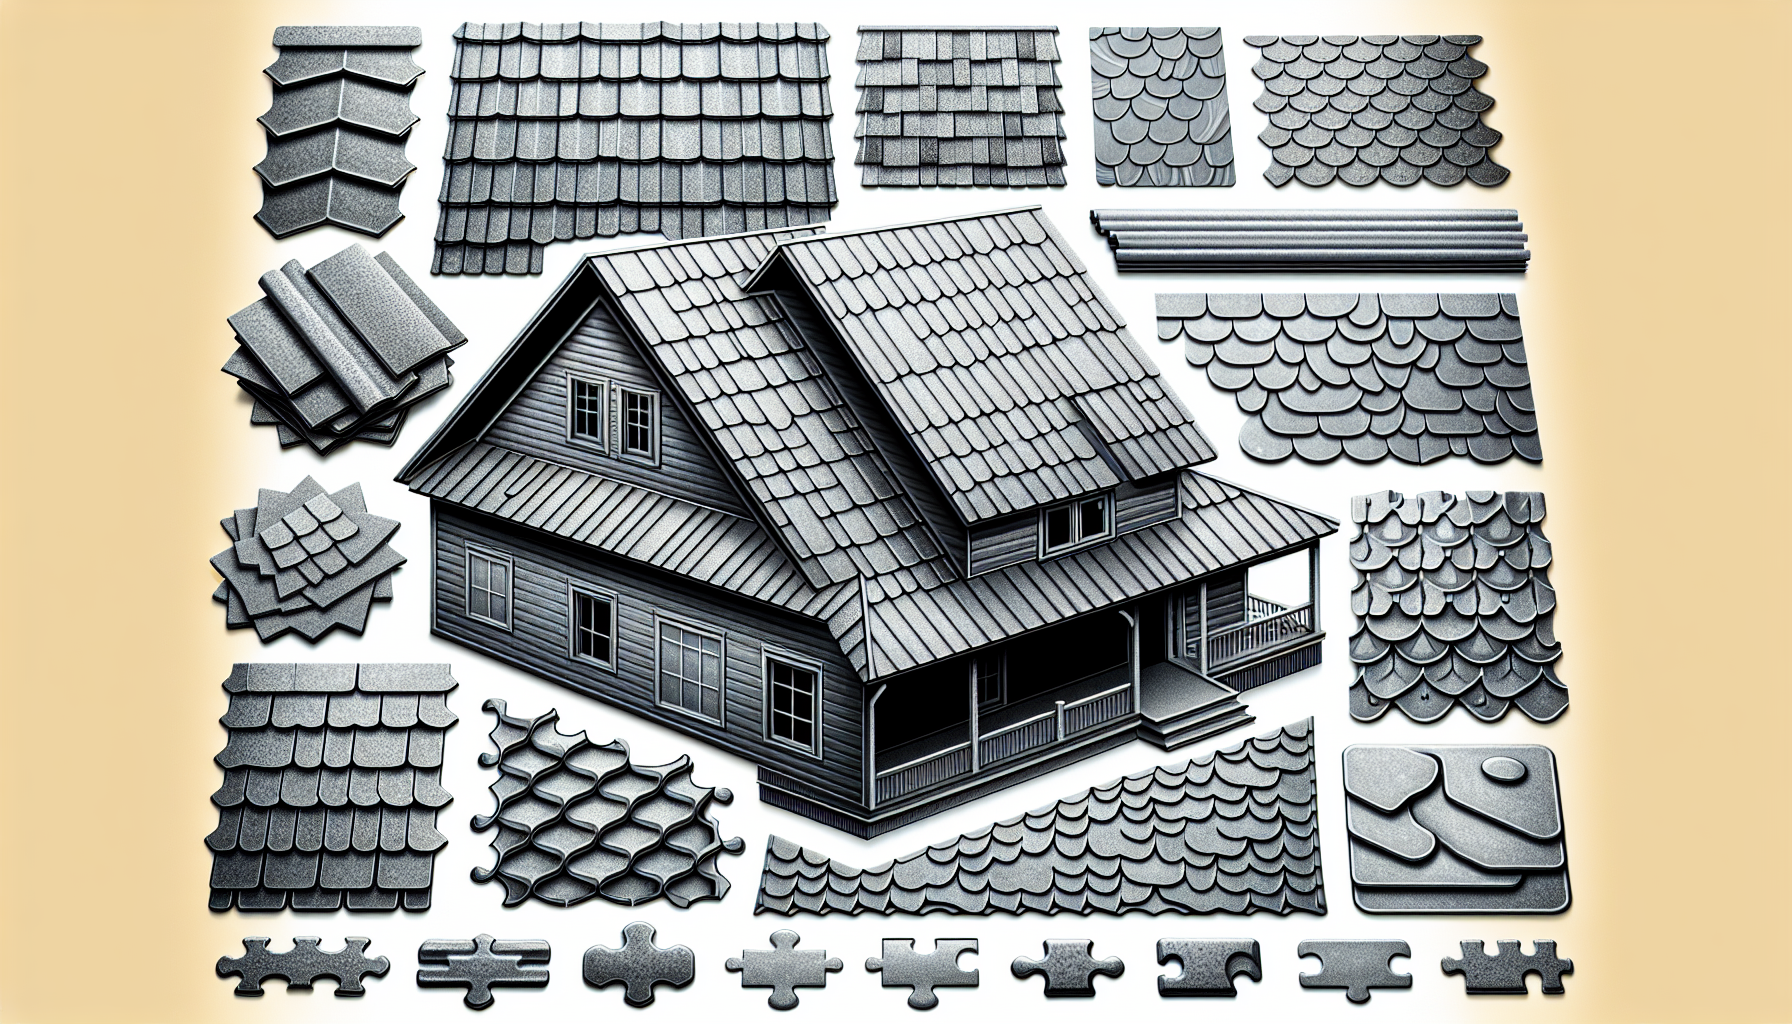 A variety of metal shingle options including stone-coated, stamped, and interlocking metal shingles